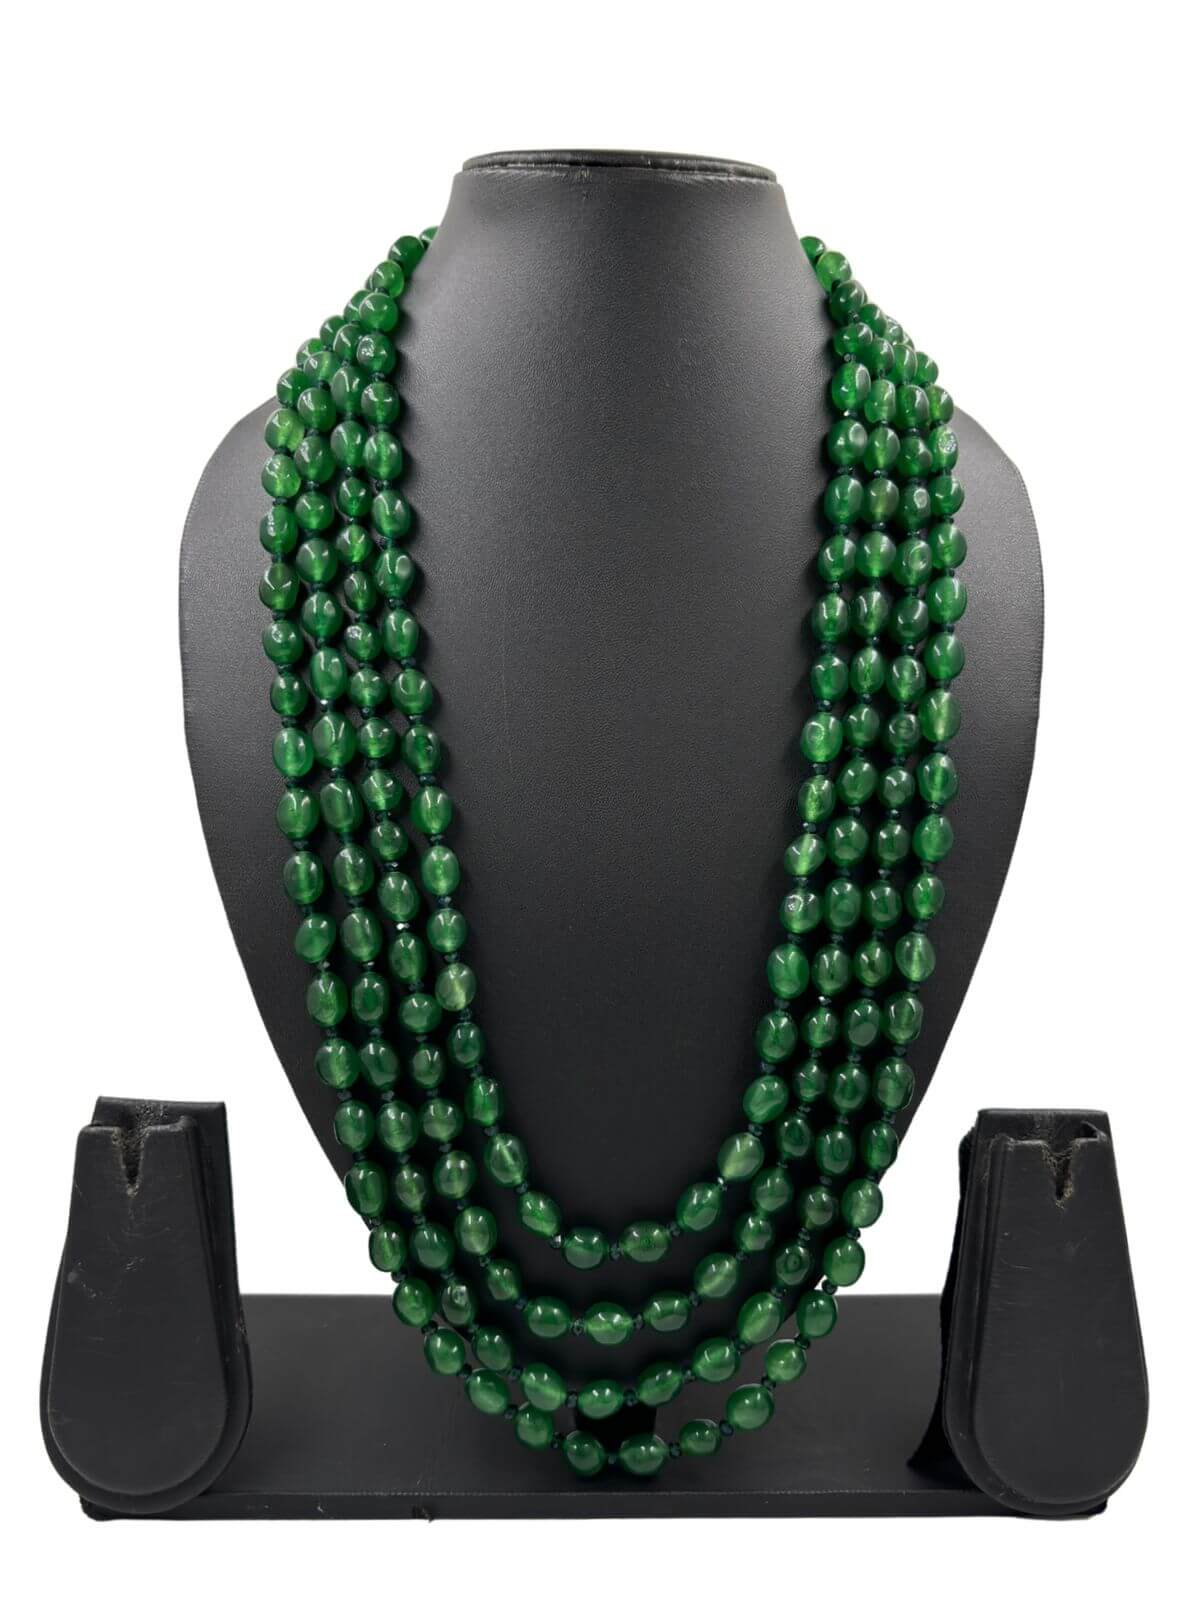 Multi Layered Semi Precious Green Jade Beads Necklace For Men And Women